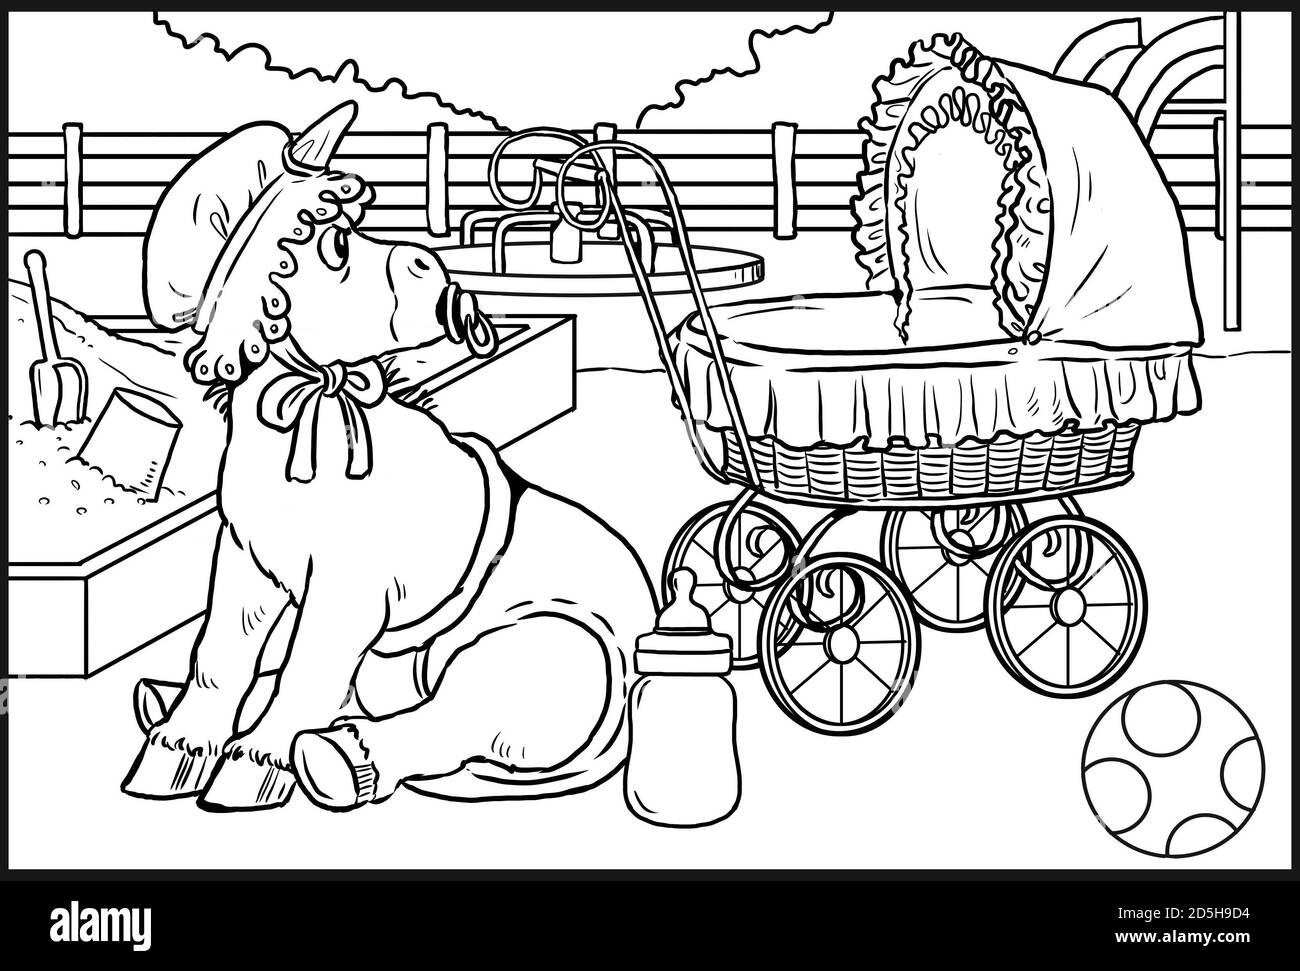 Funny baby unicorn for coloring. Coloring page for horse lovers. Stock Photo